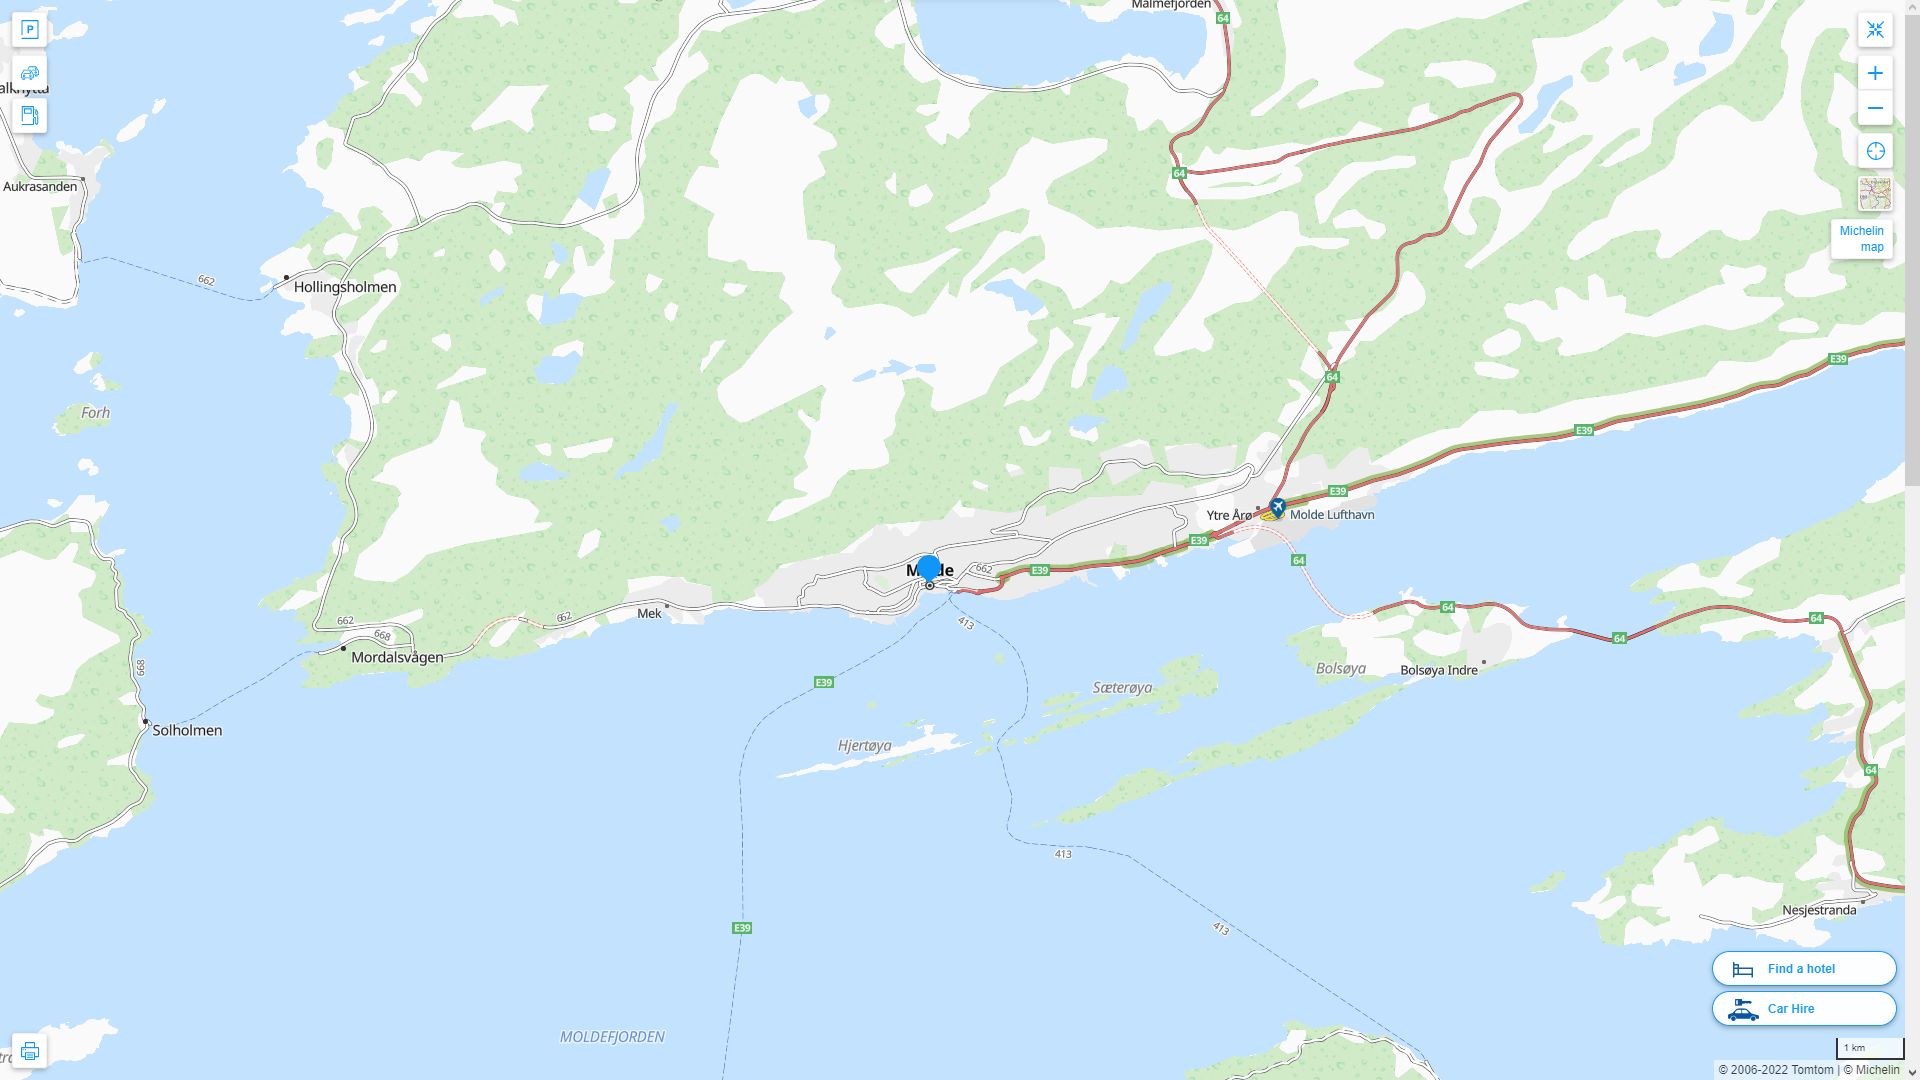 Molde Highway and Road Map